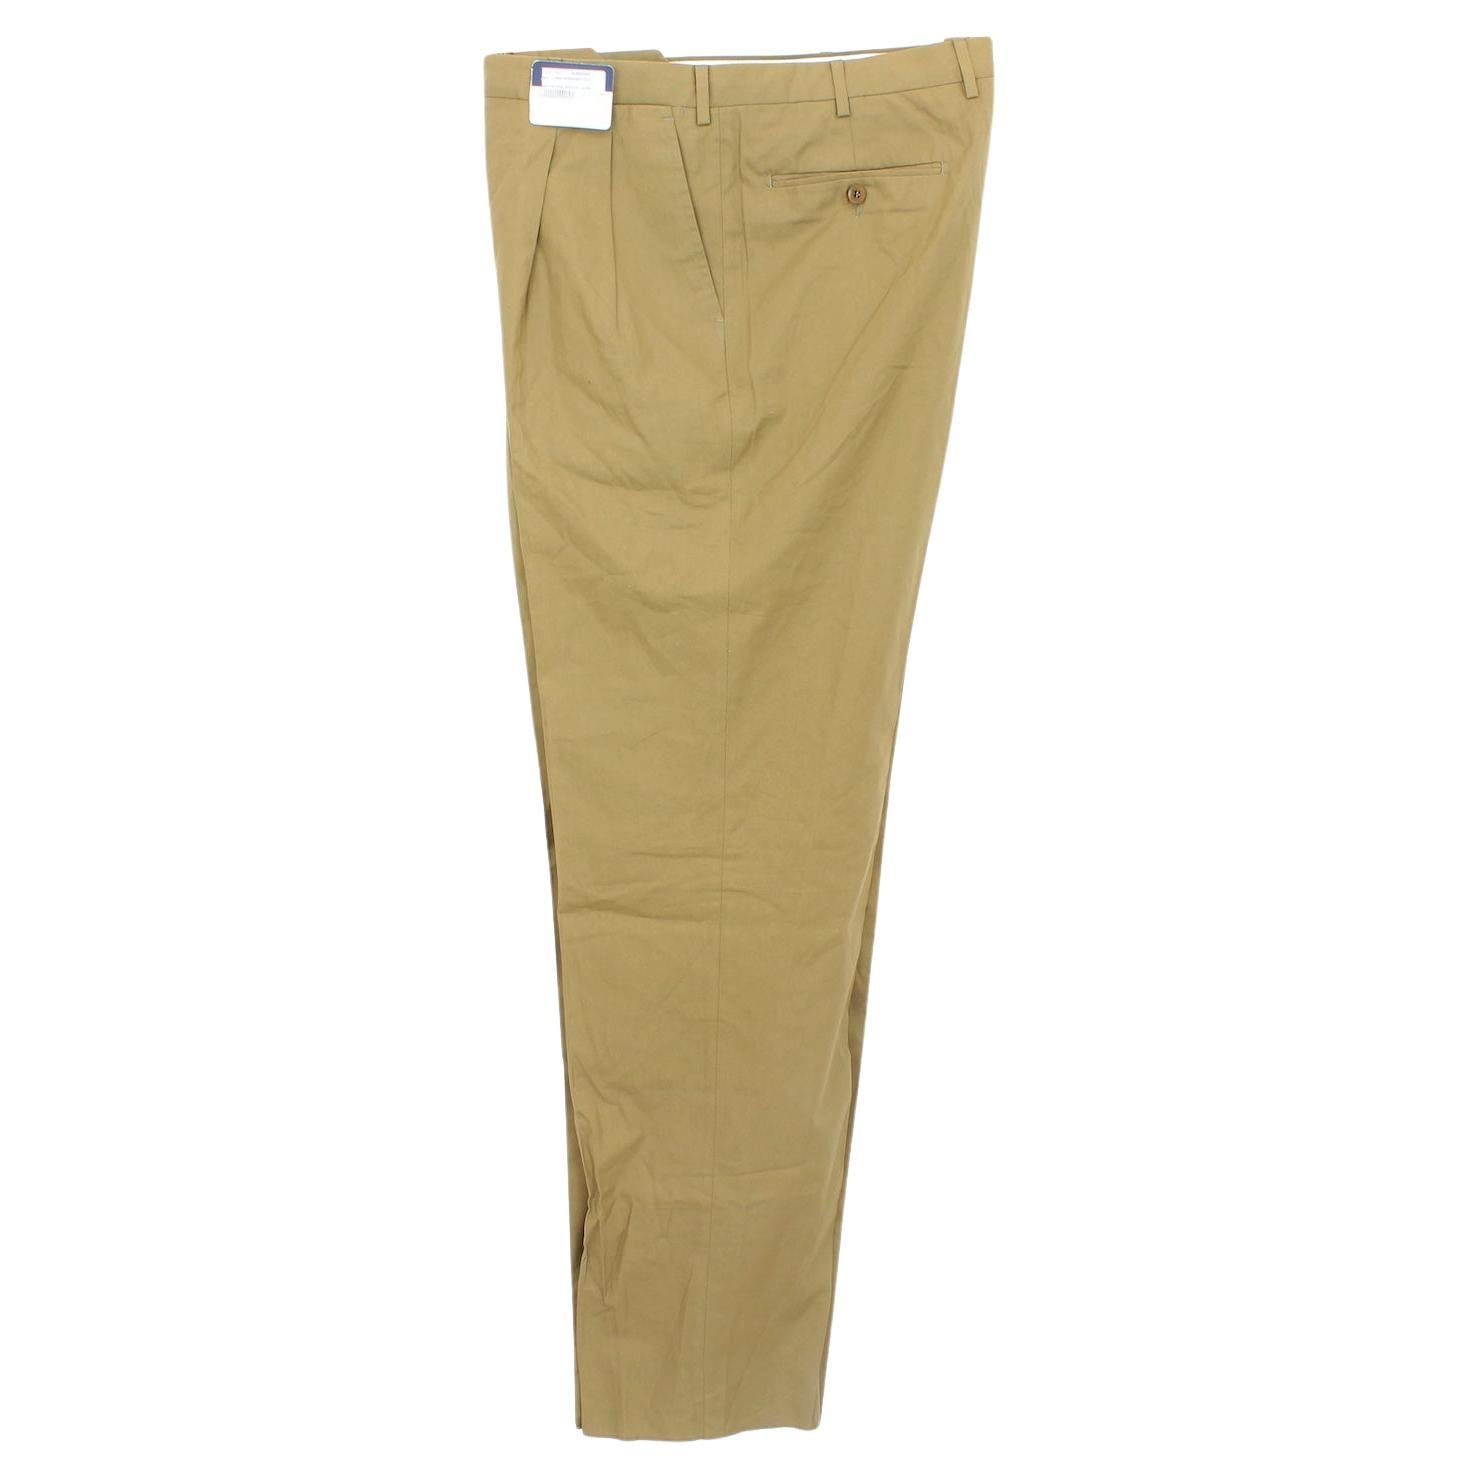 Burberry Beige Cotton Trousers 1990s For Sale